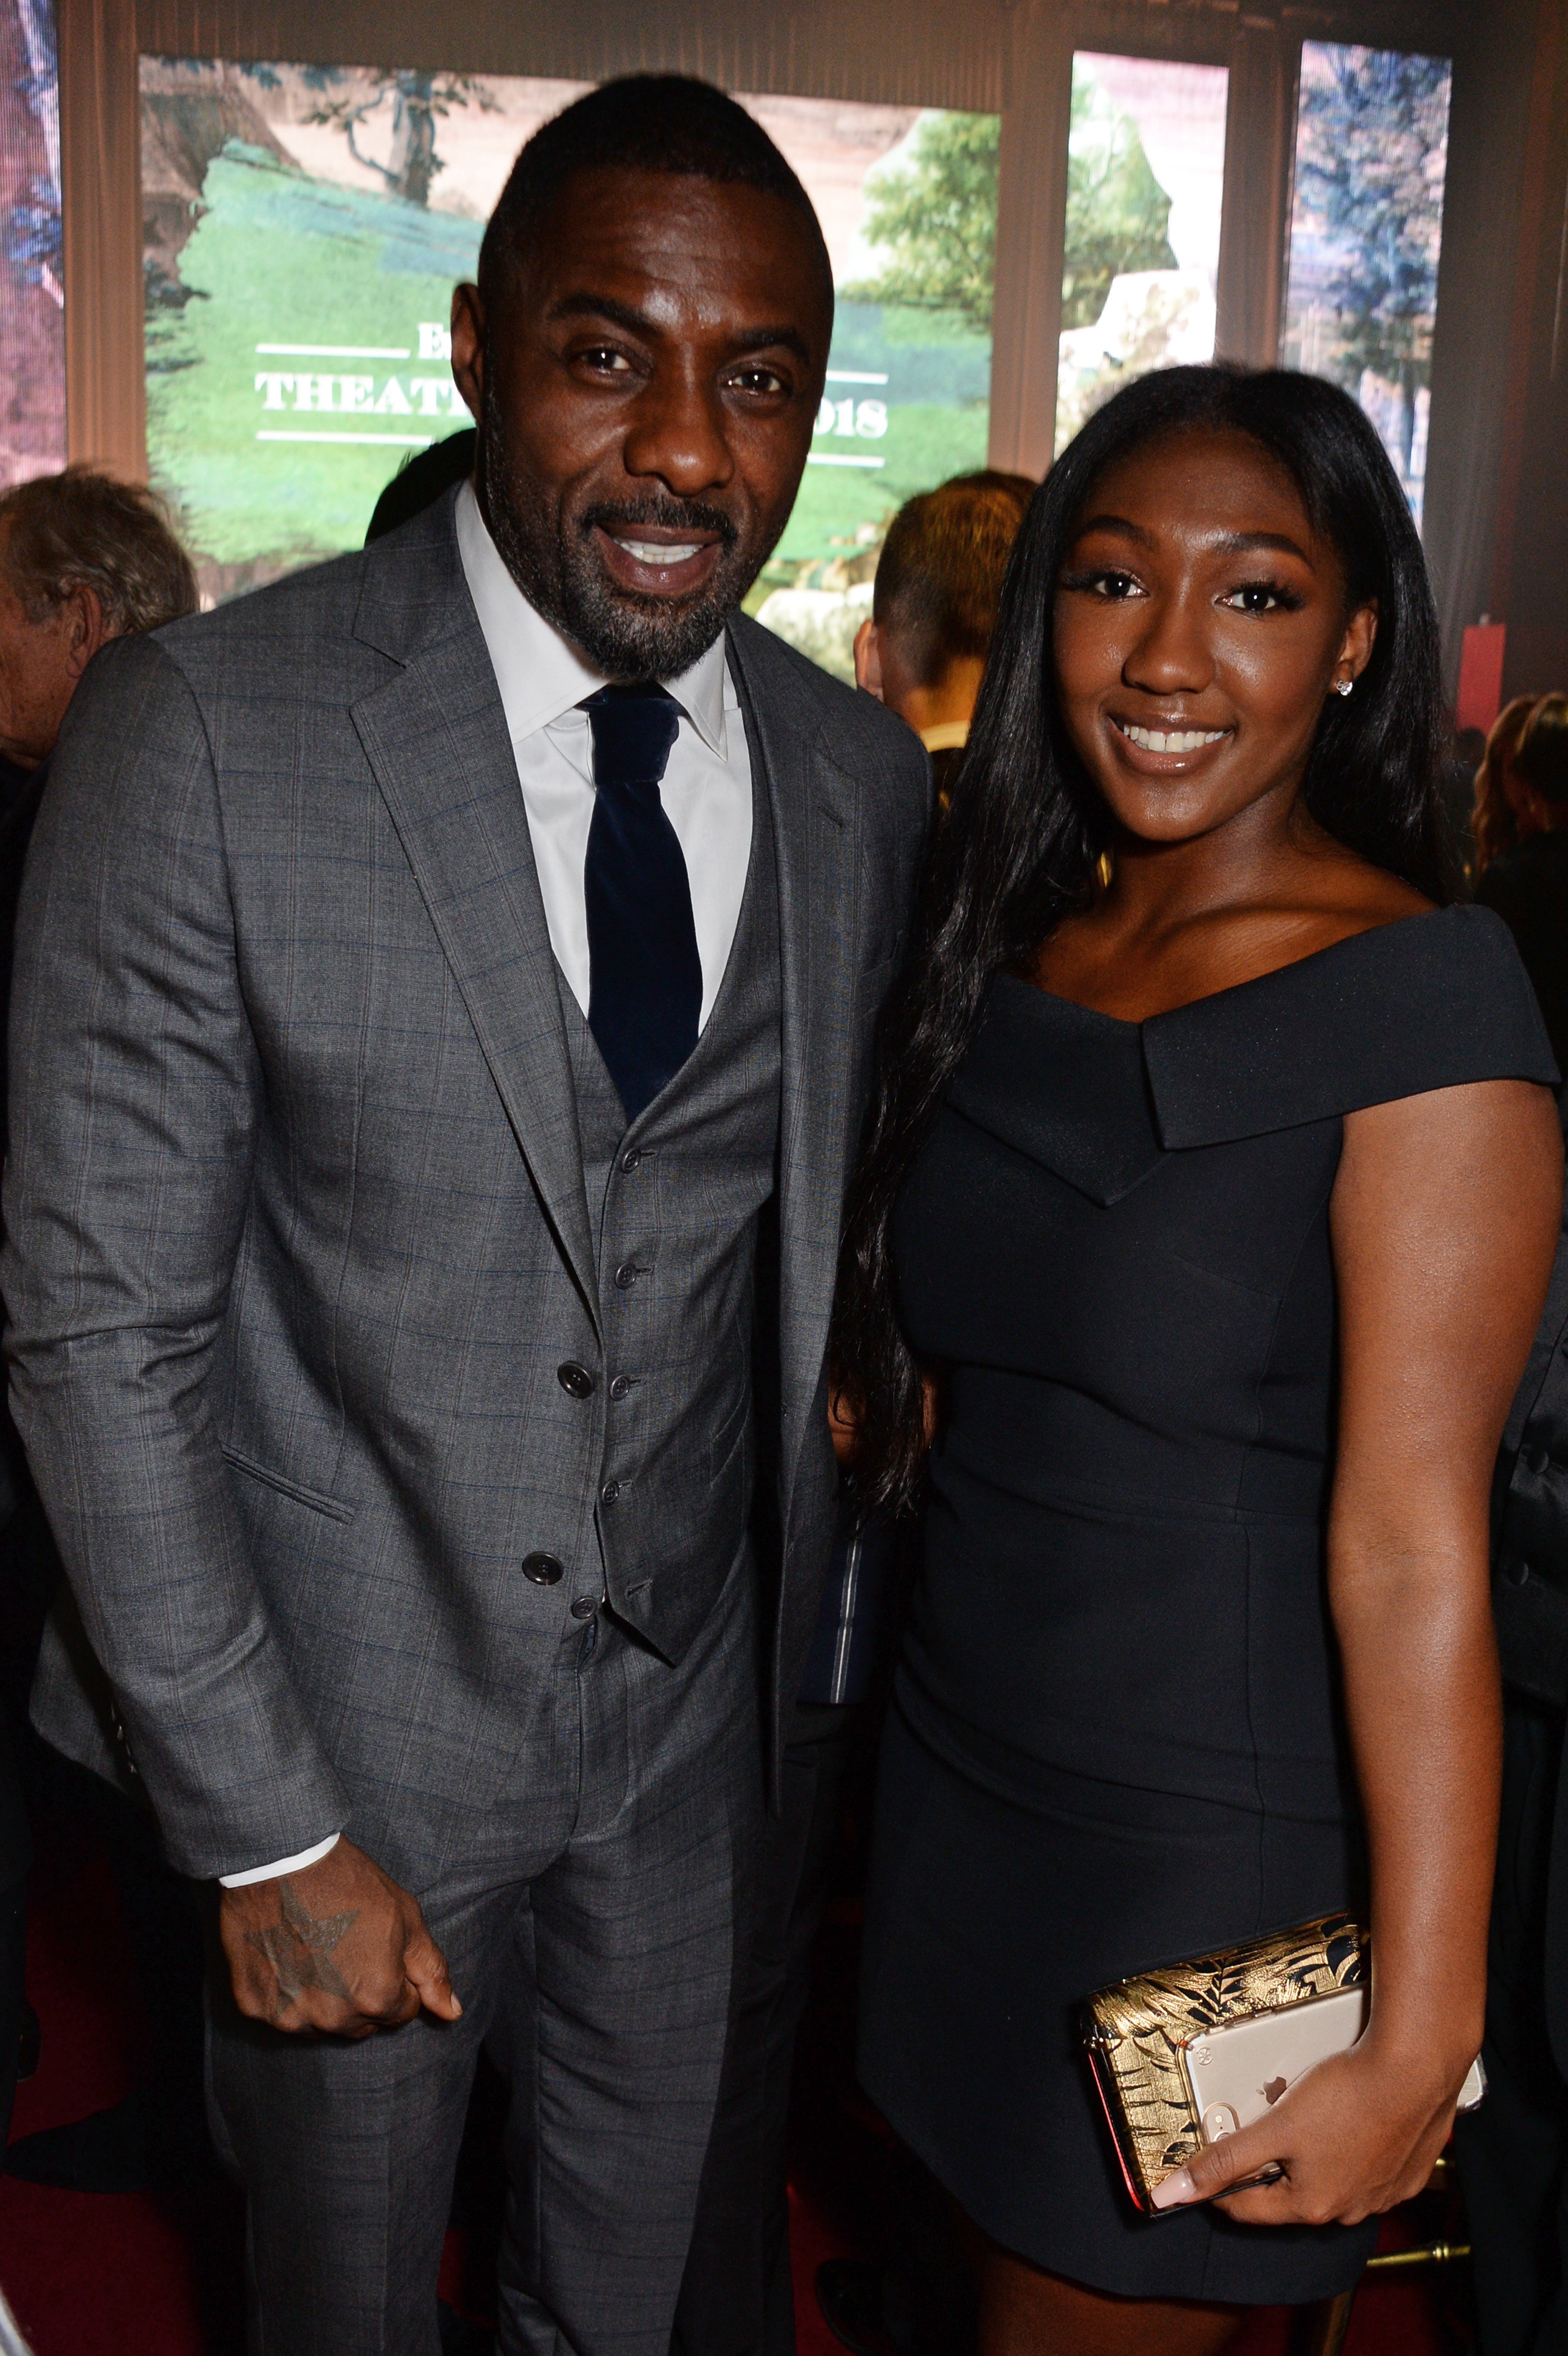  Idris Elba and Isan Elba attend The 64th Evening Standard Theatre Awards on November 18, 2018, in London, England. | Source: Getty Images.